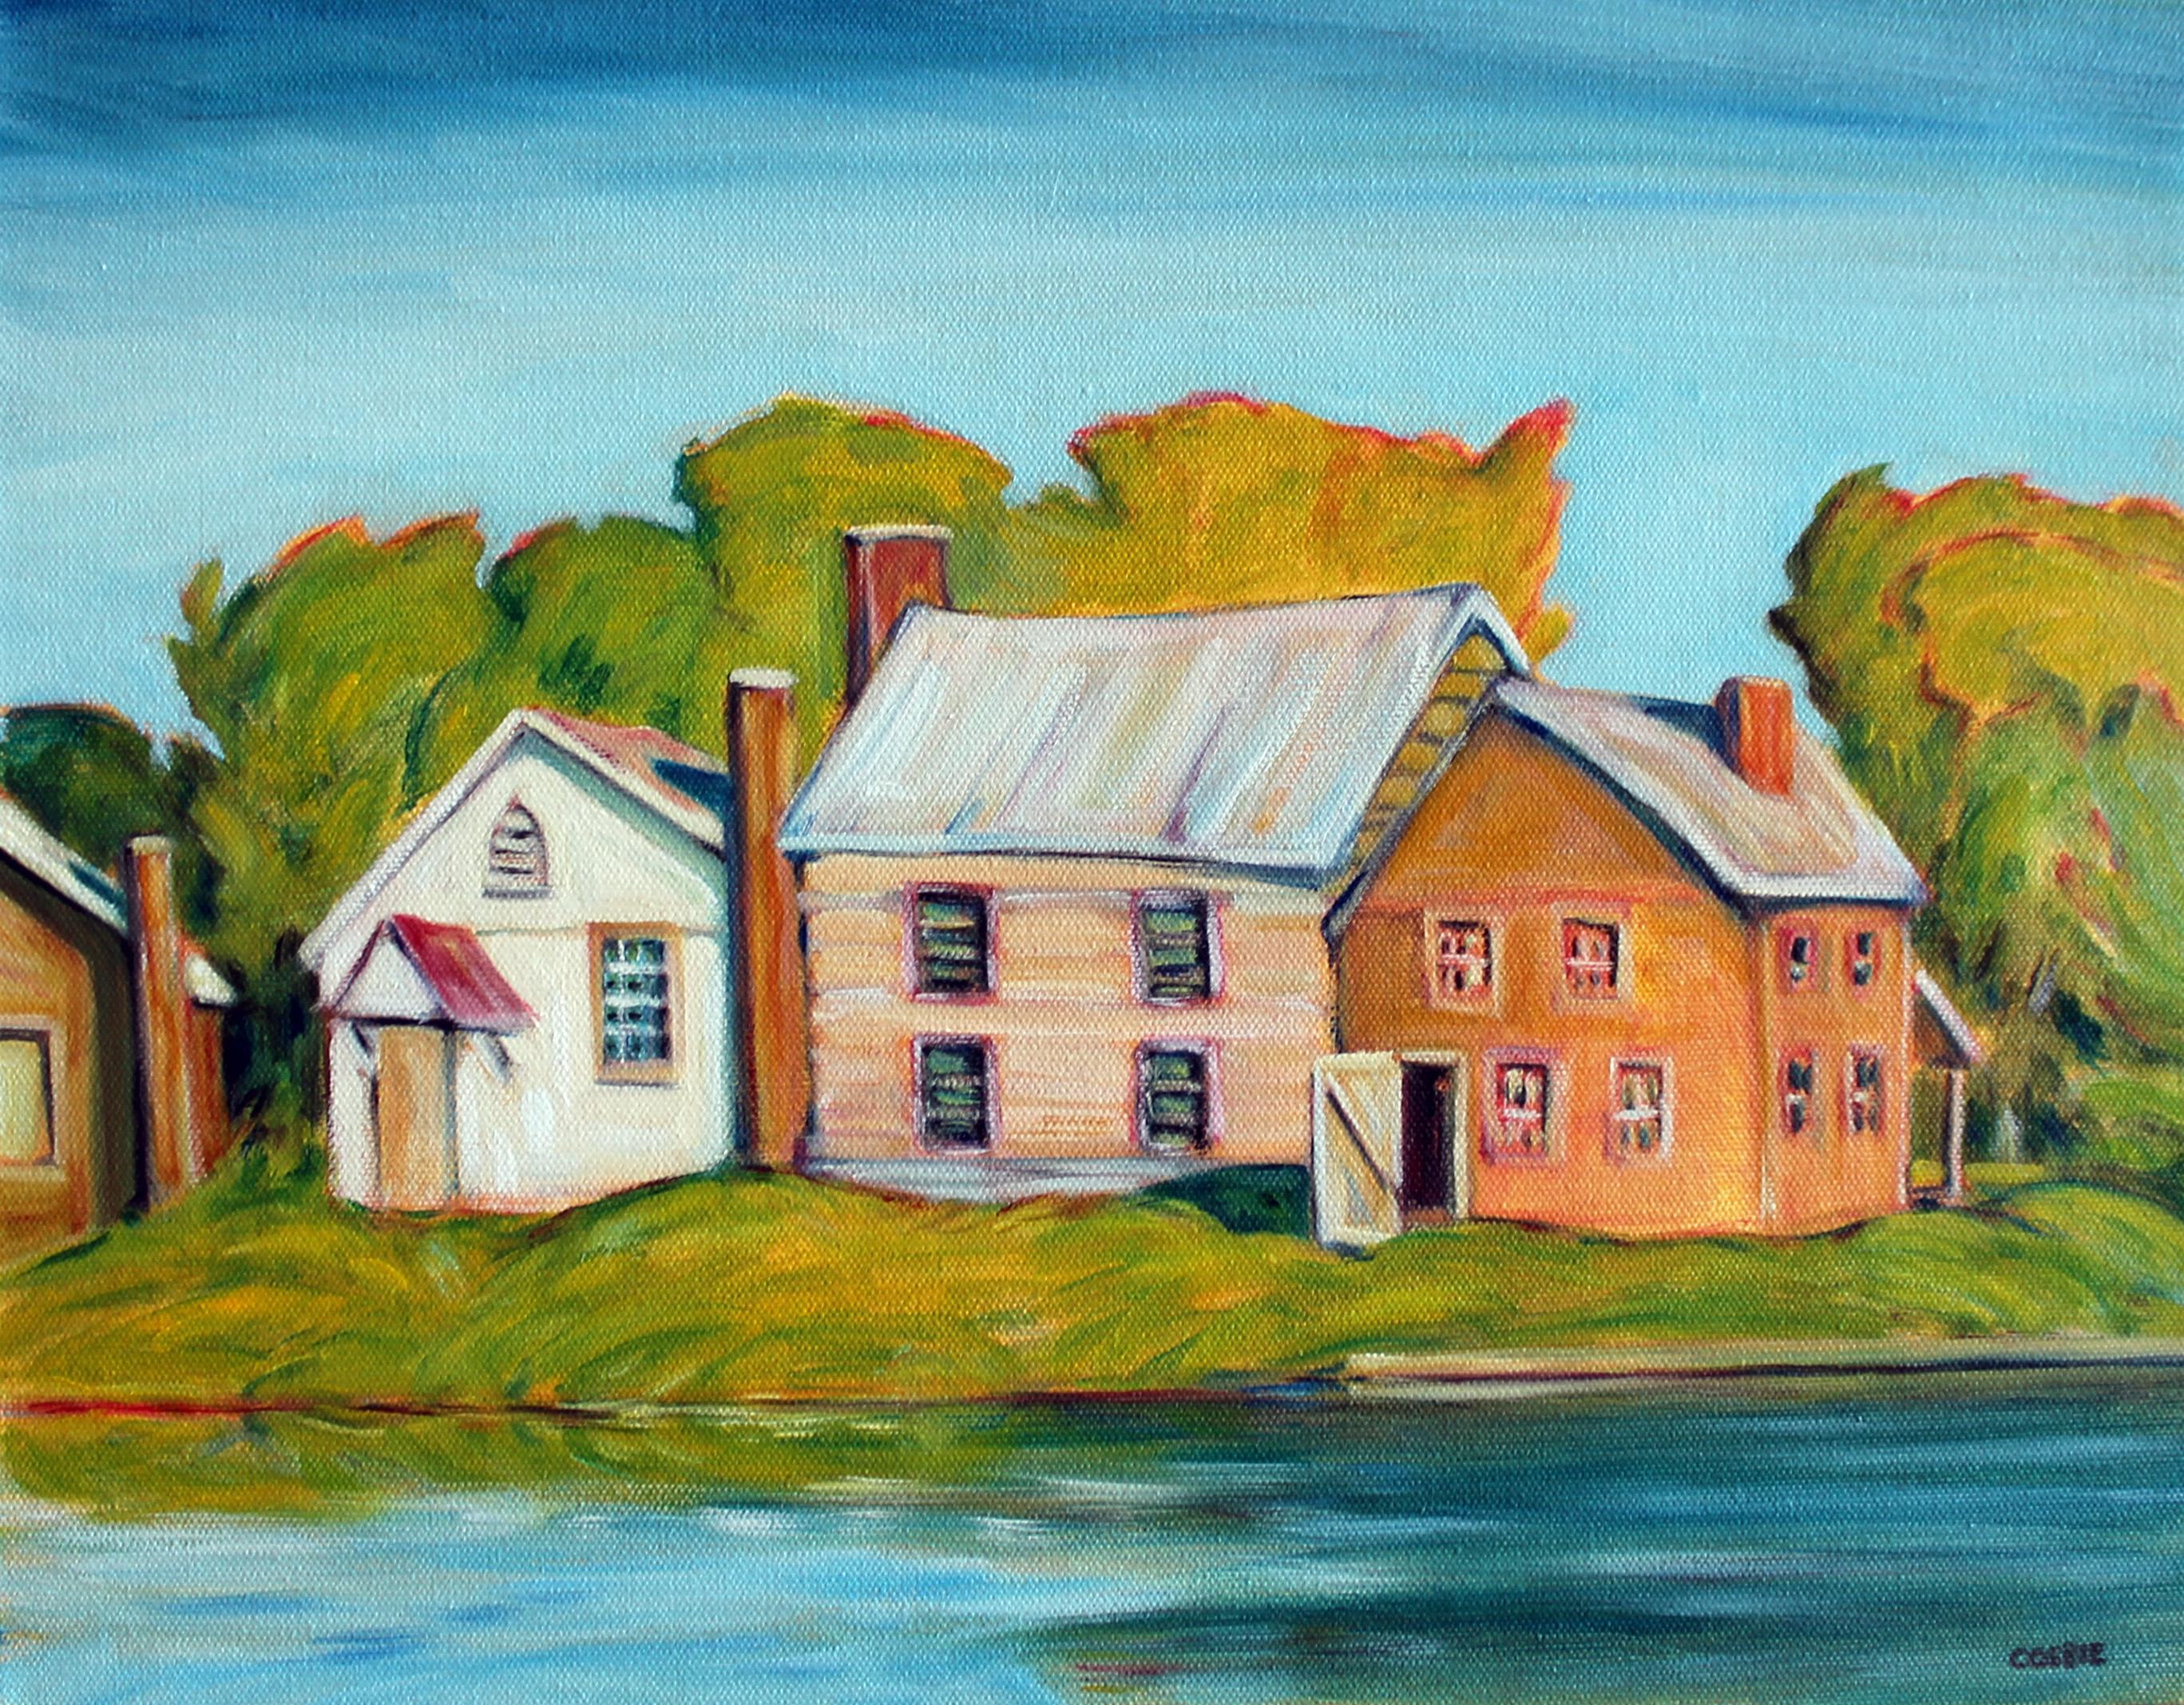 Doug Cosbie Interior Painting - Old Bedford Village, PA, Oil Painting